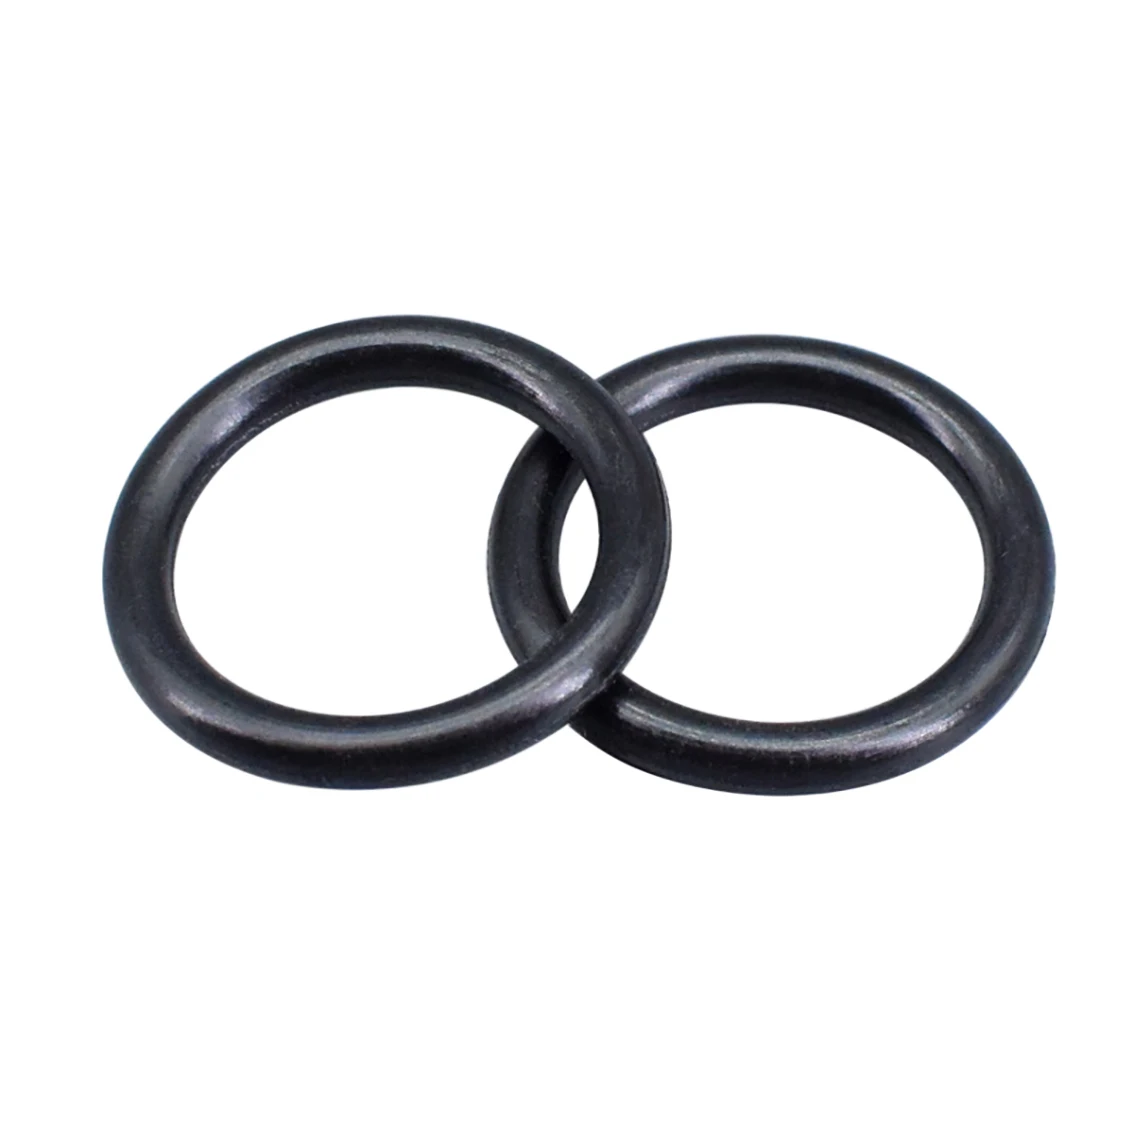 

1Pcs Black NBR Rubber O Ring 8.6mm Wire Diameter O Rings Gaskets OD 300-680mm O-Ring Oil Seals Washer